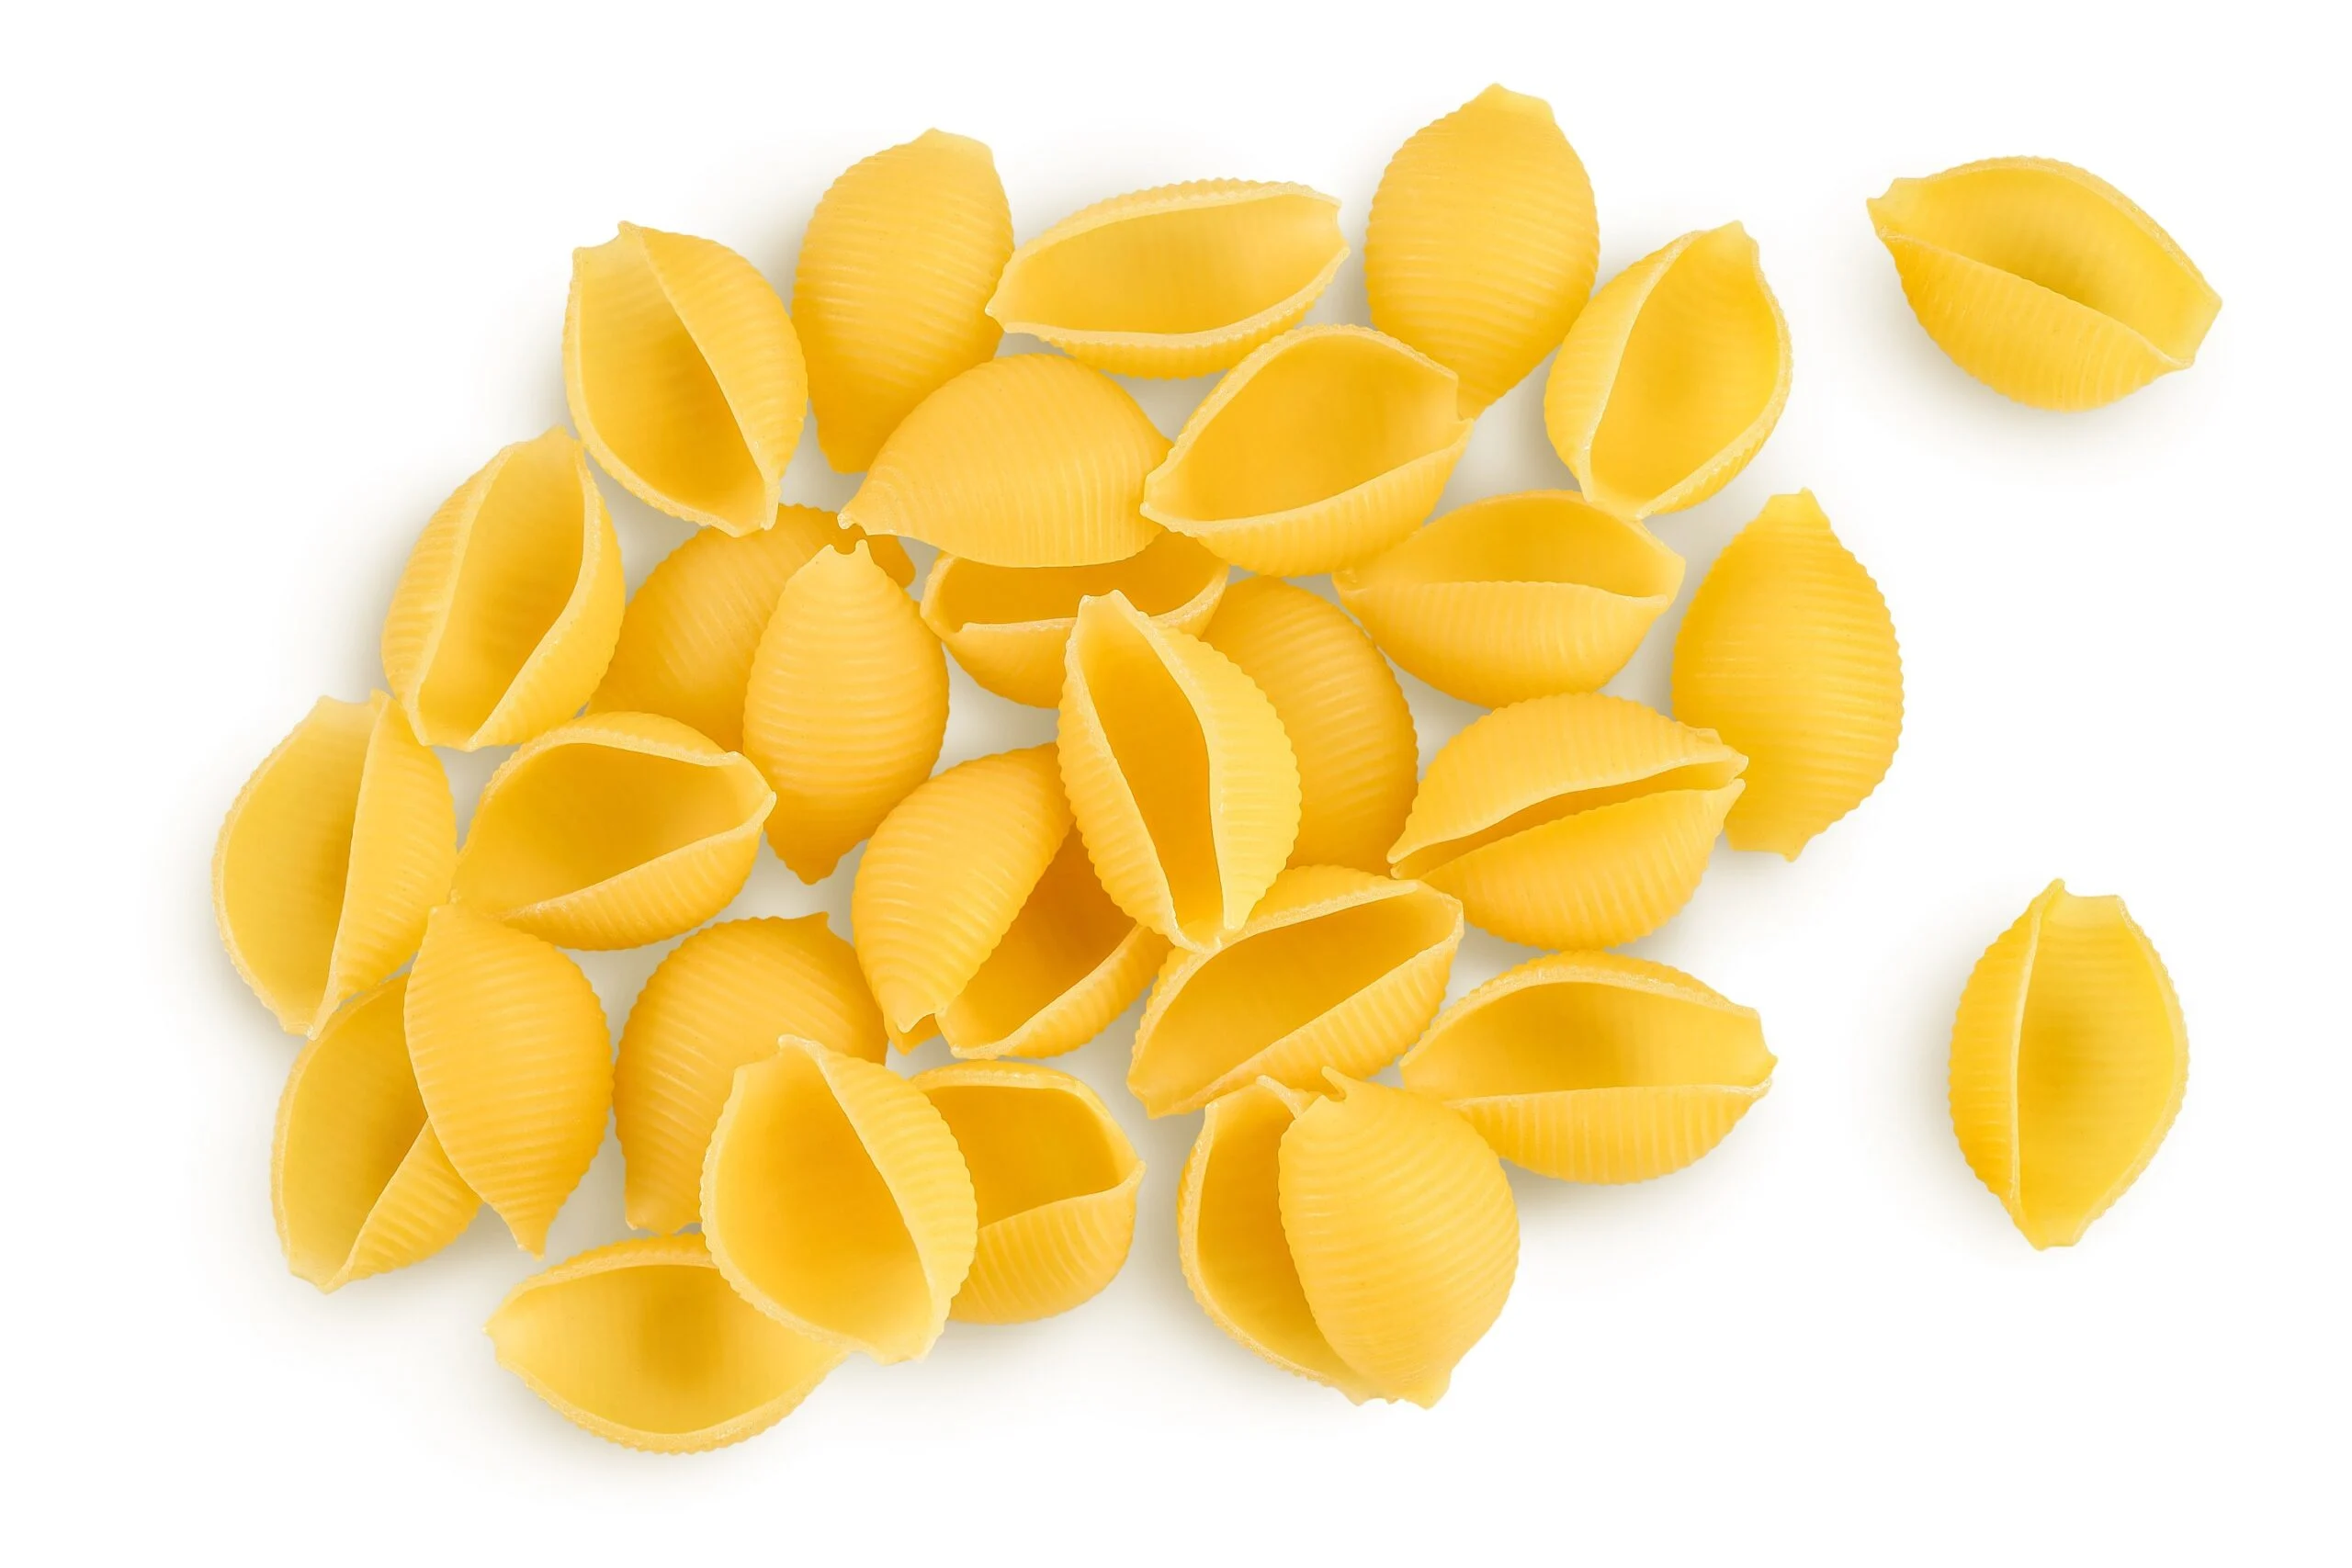 Uncooked,dried,conchiglie.,raw,organic,shell,pasta,isolated,on,white